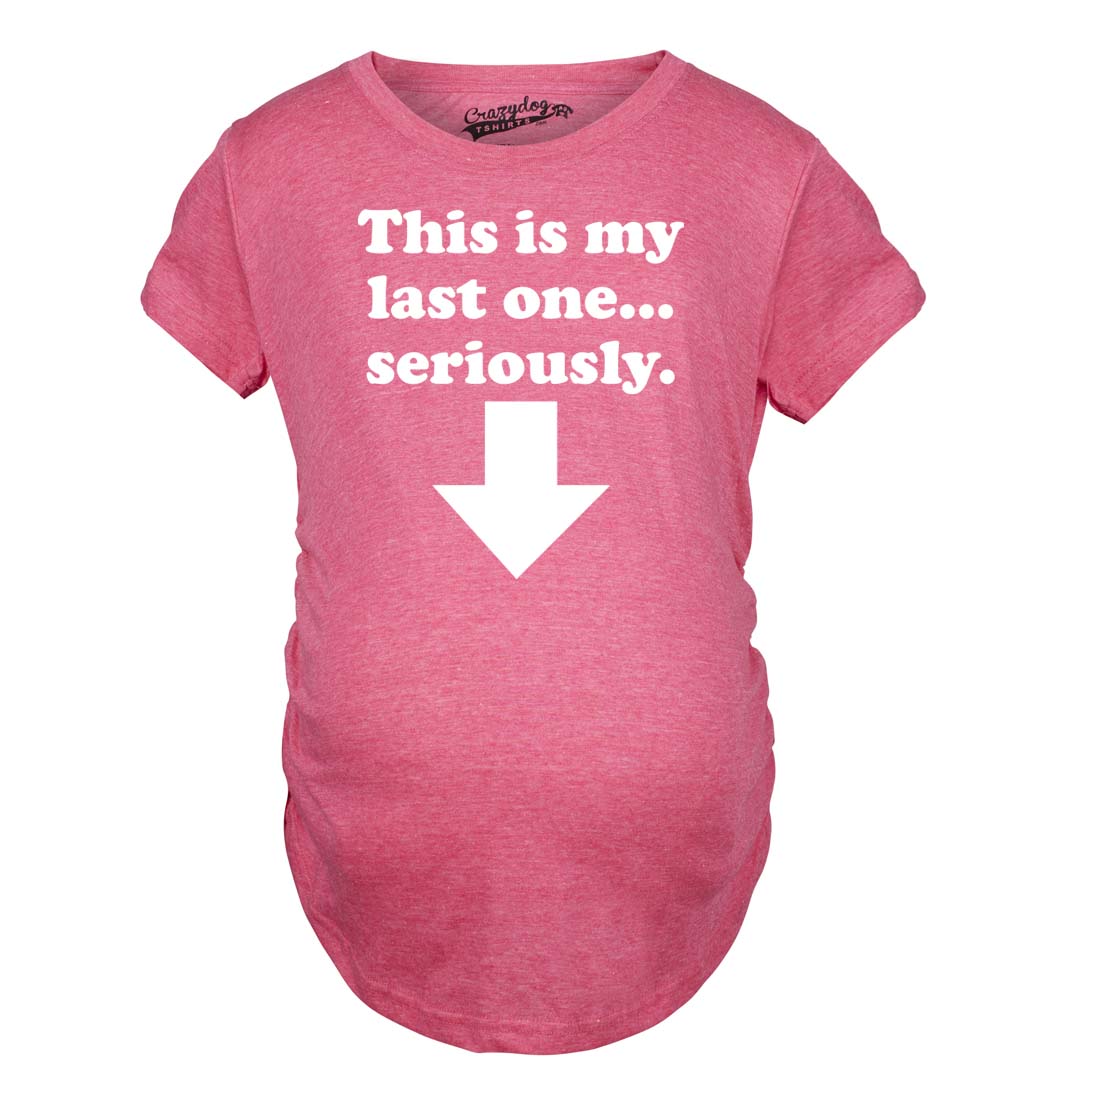 Funny Pink This Is My Last One Seriously Maternity T Shirt Nerdy Sarcastic Tee